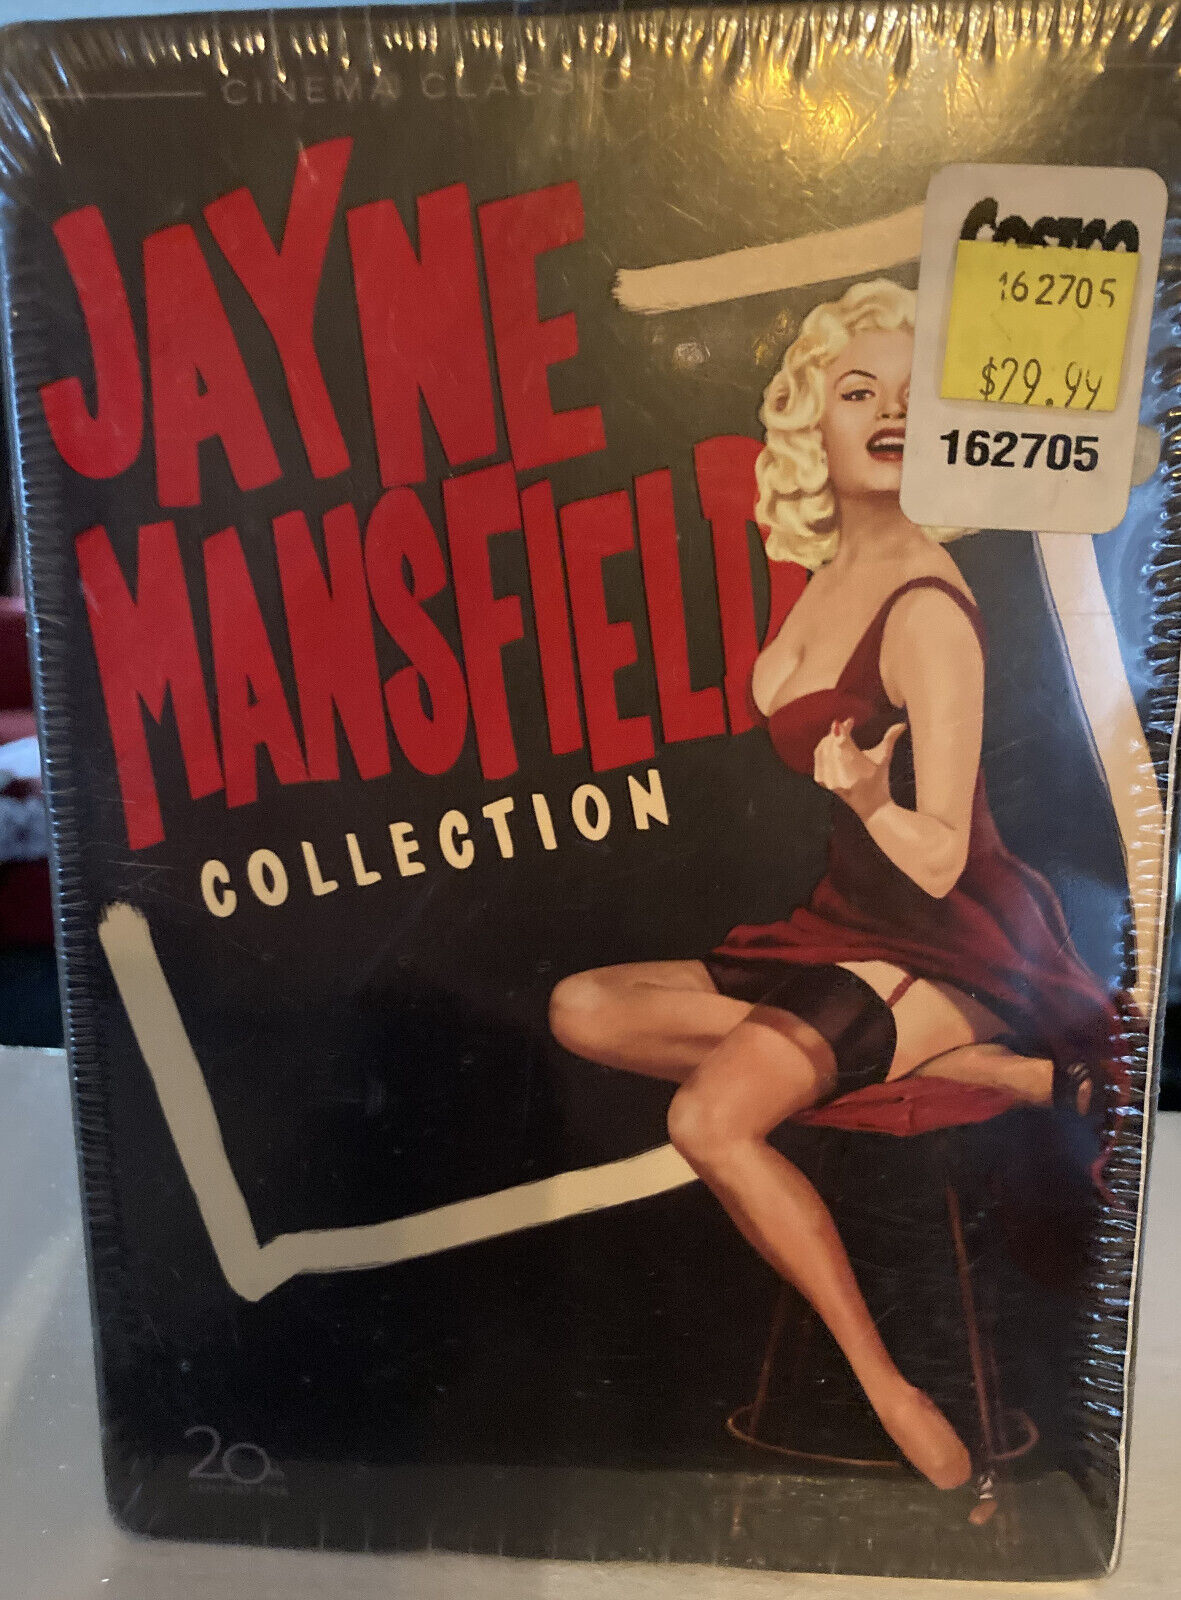 Jayne Mansfield Collection (DVD, 2006, 3-Disc Set)